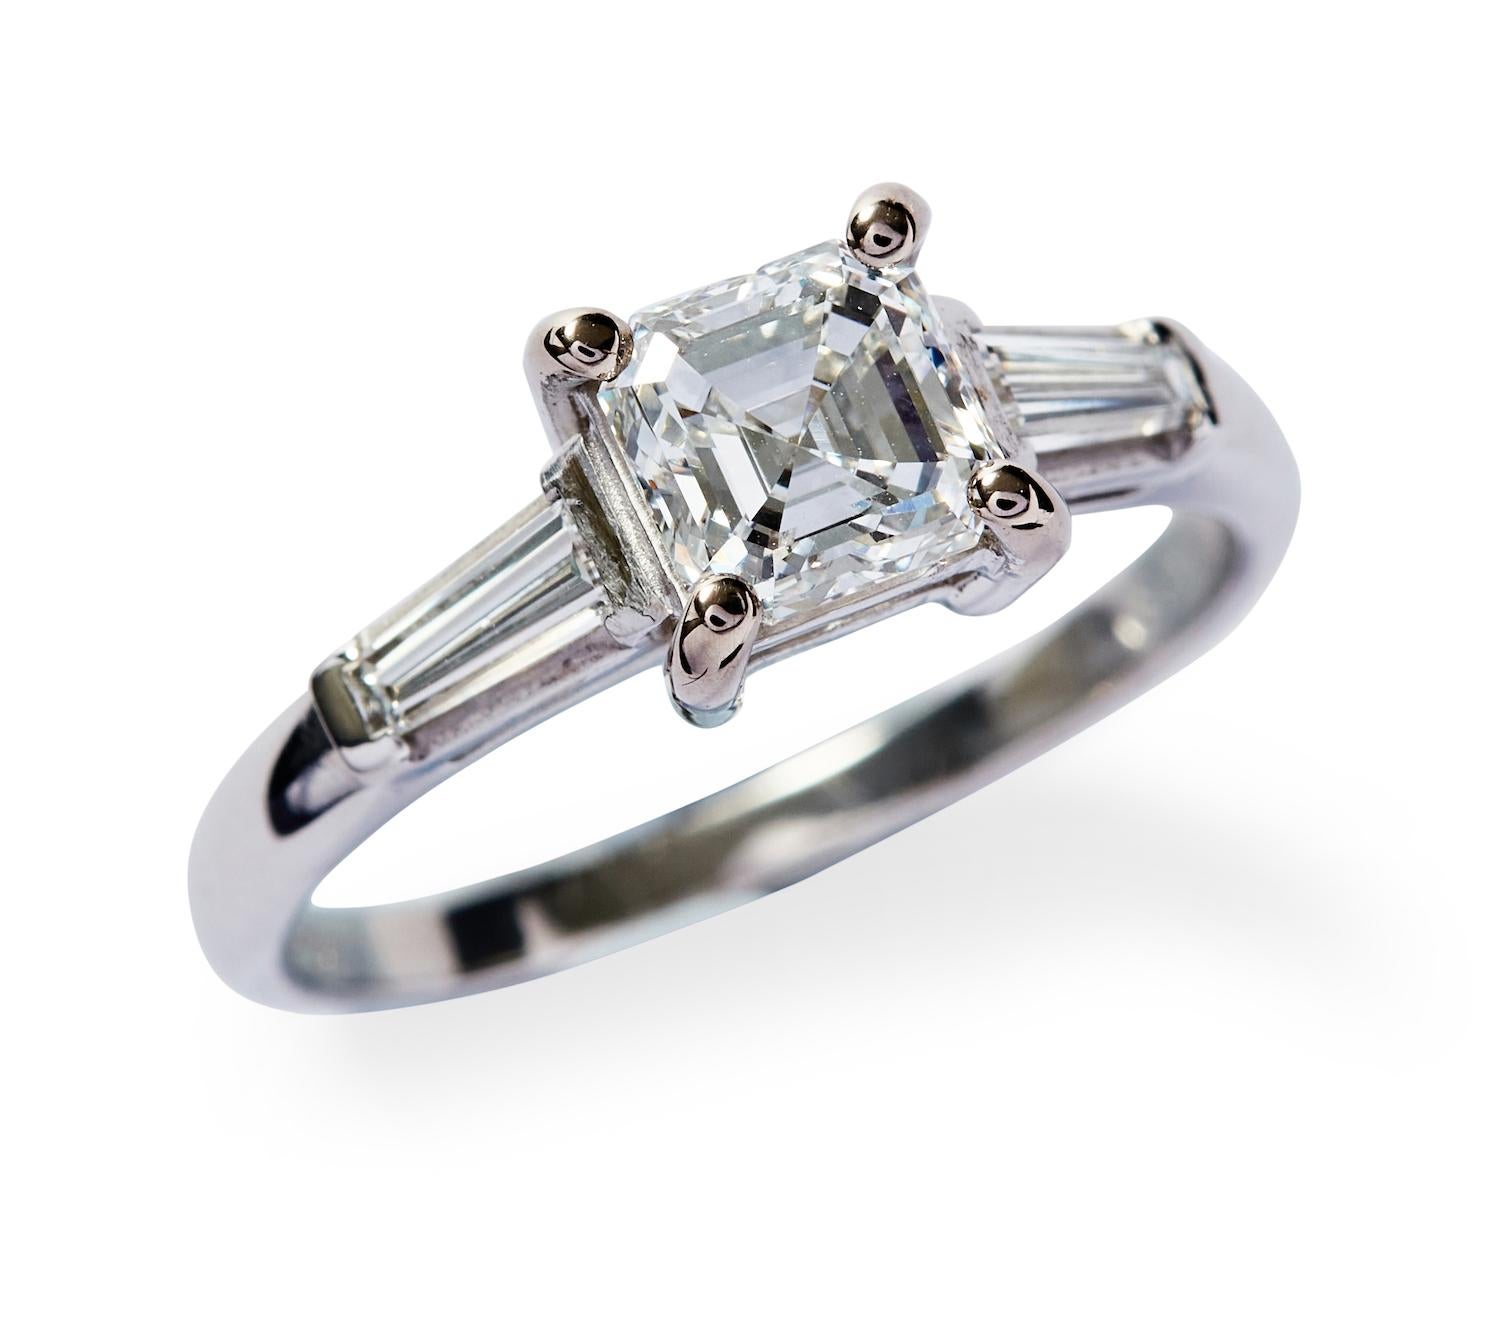 Unique features: 
SOLITAIRE DIAMOND RING 
The emerald-cut diamond weighing 1.02 carats, is claw-set between a pair of tapered baguette diamonds, mounted in 18ct white gold, size M. 

Accompanied by a GSL report numbered AA53882

Metal: 18ct White